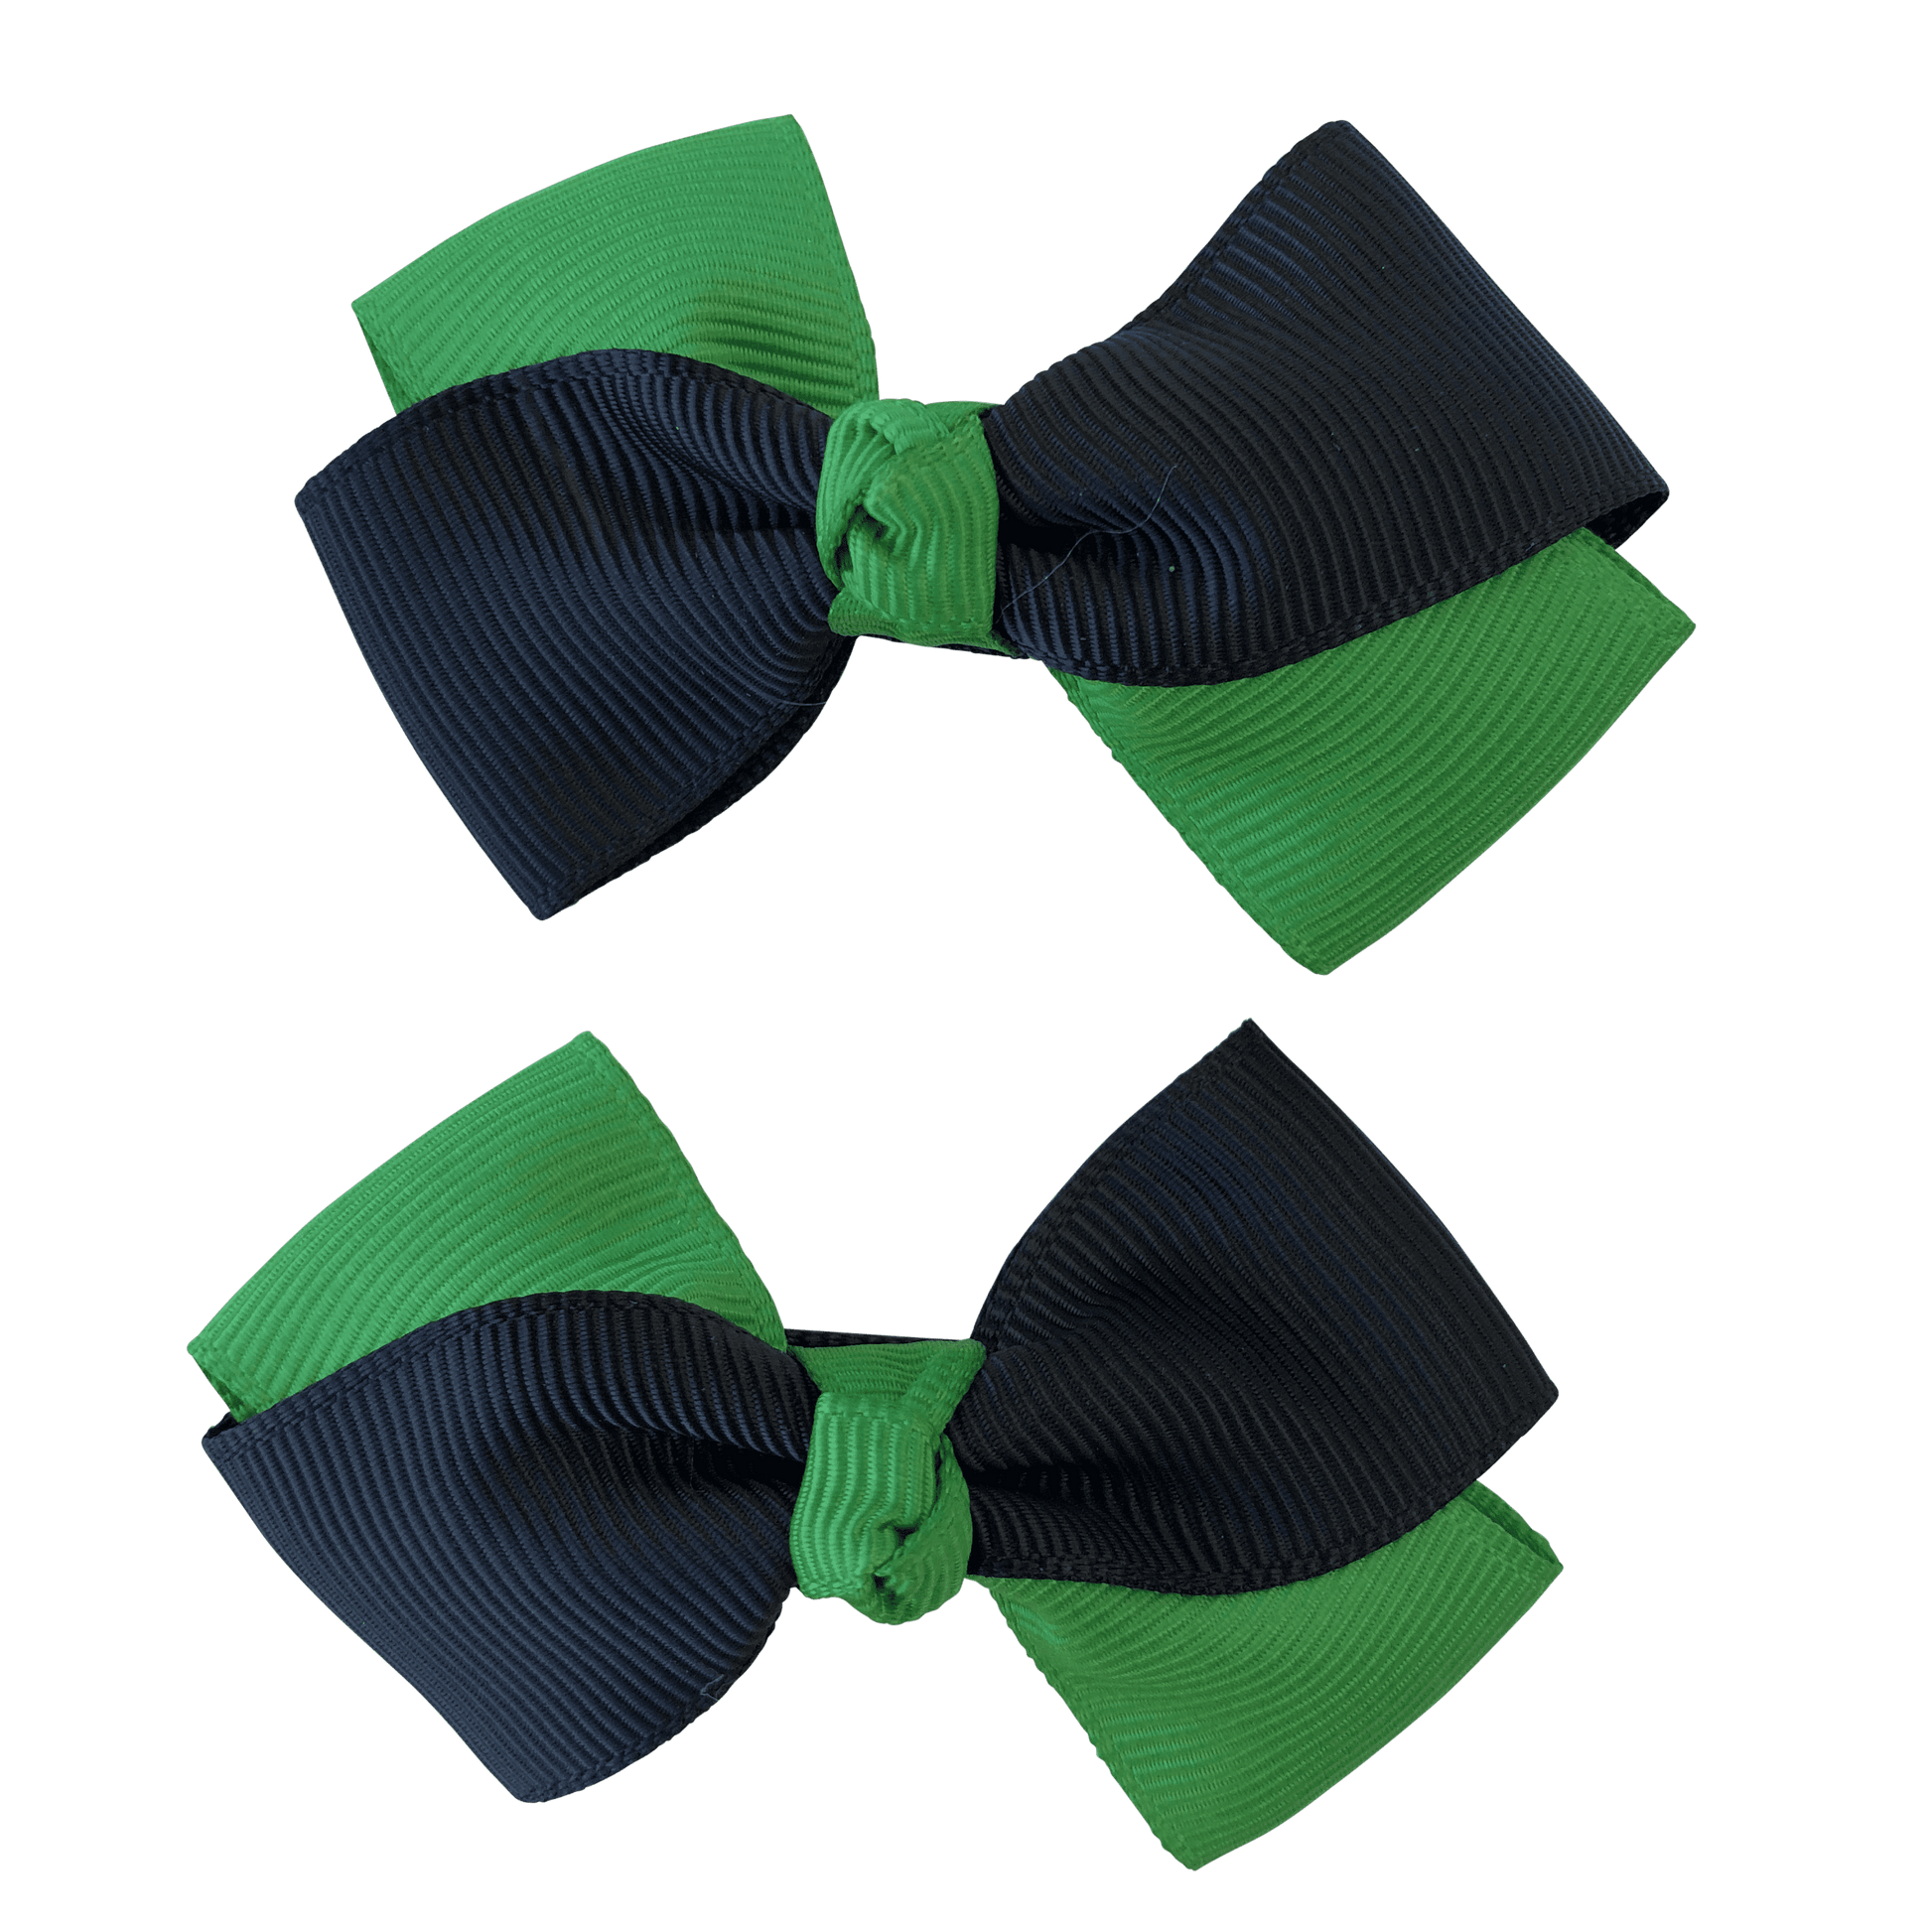 Green & Black Hair Accessories - Assorted Hair Accessories - School Uniform Hair Accessories - Ponytails and Fairytales